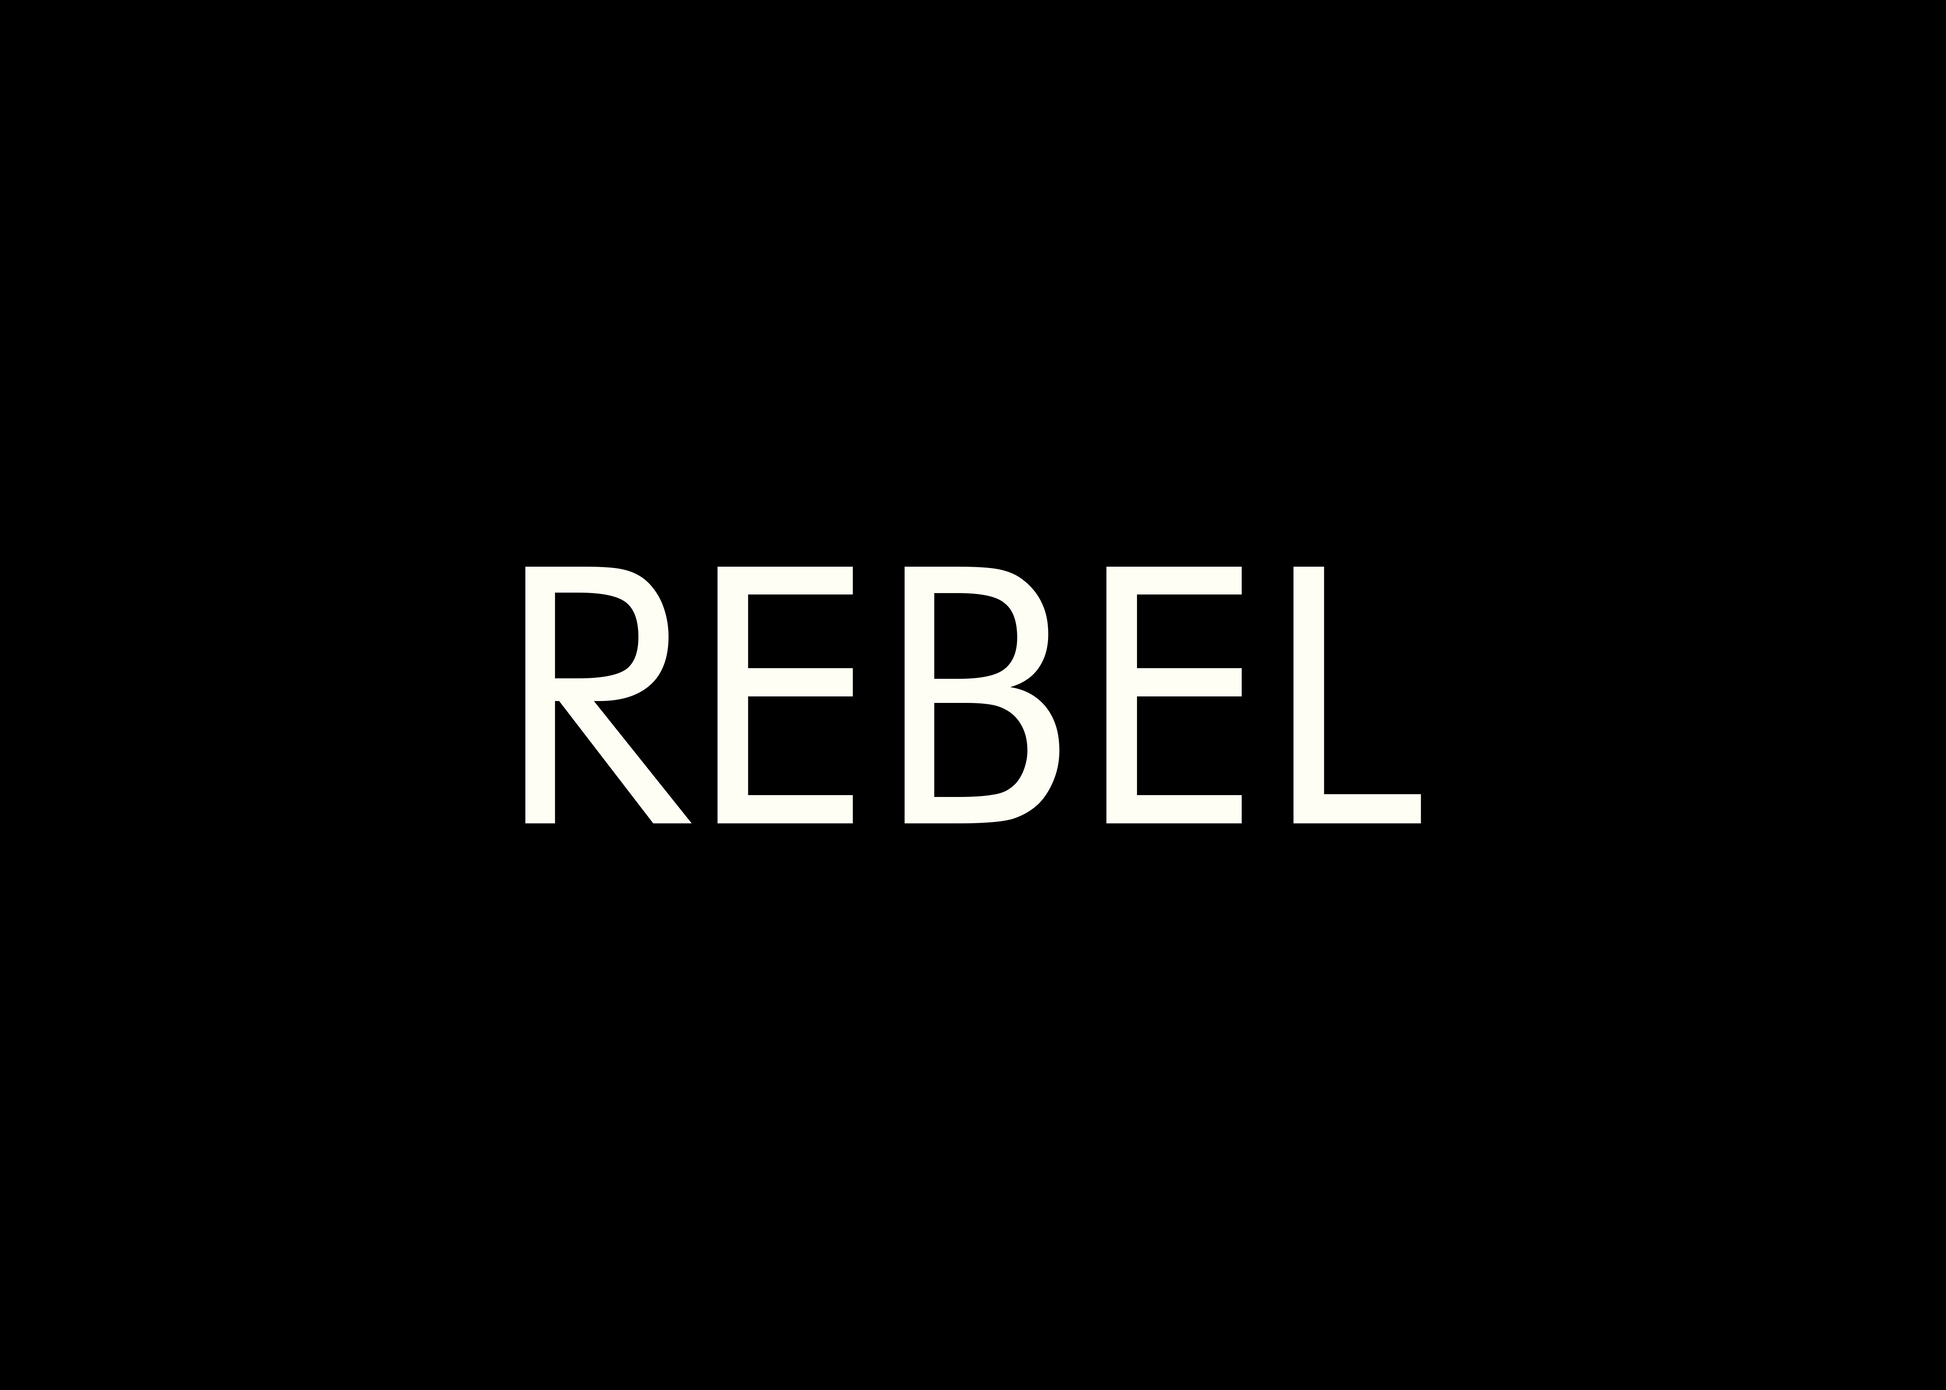 rebel the infamous collection DTG design graphic